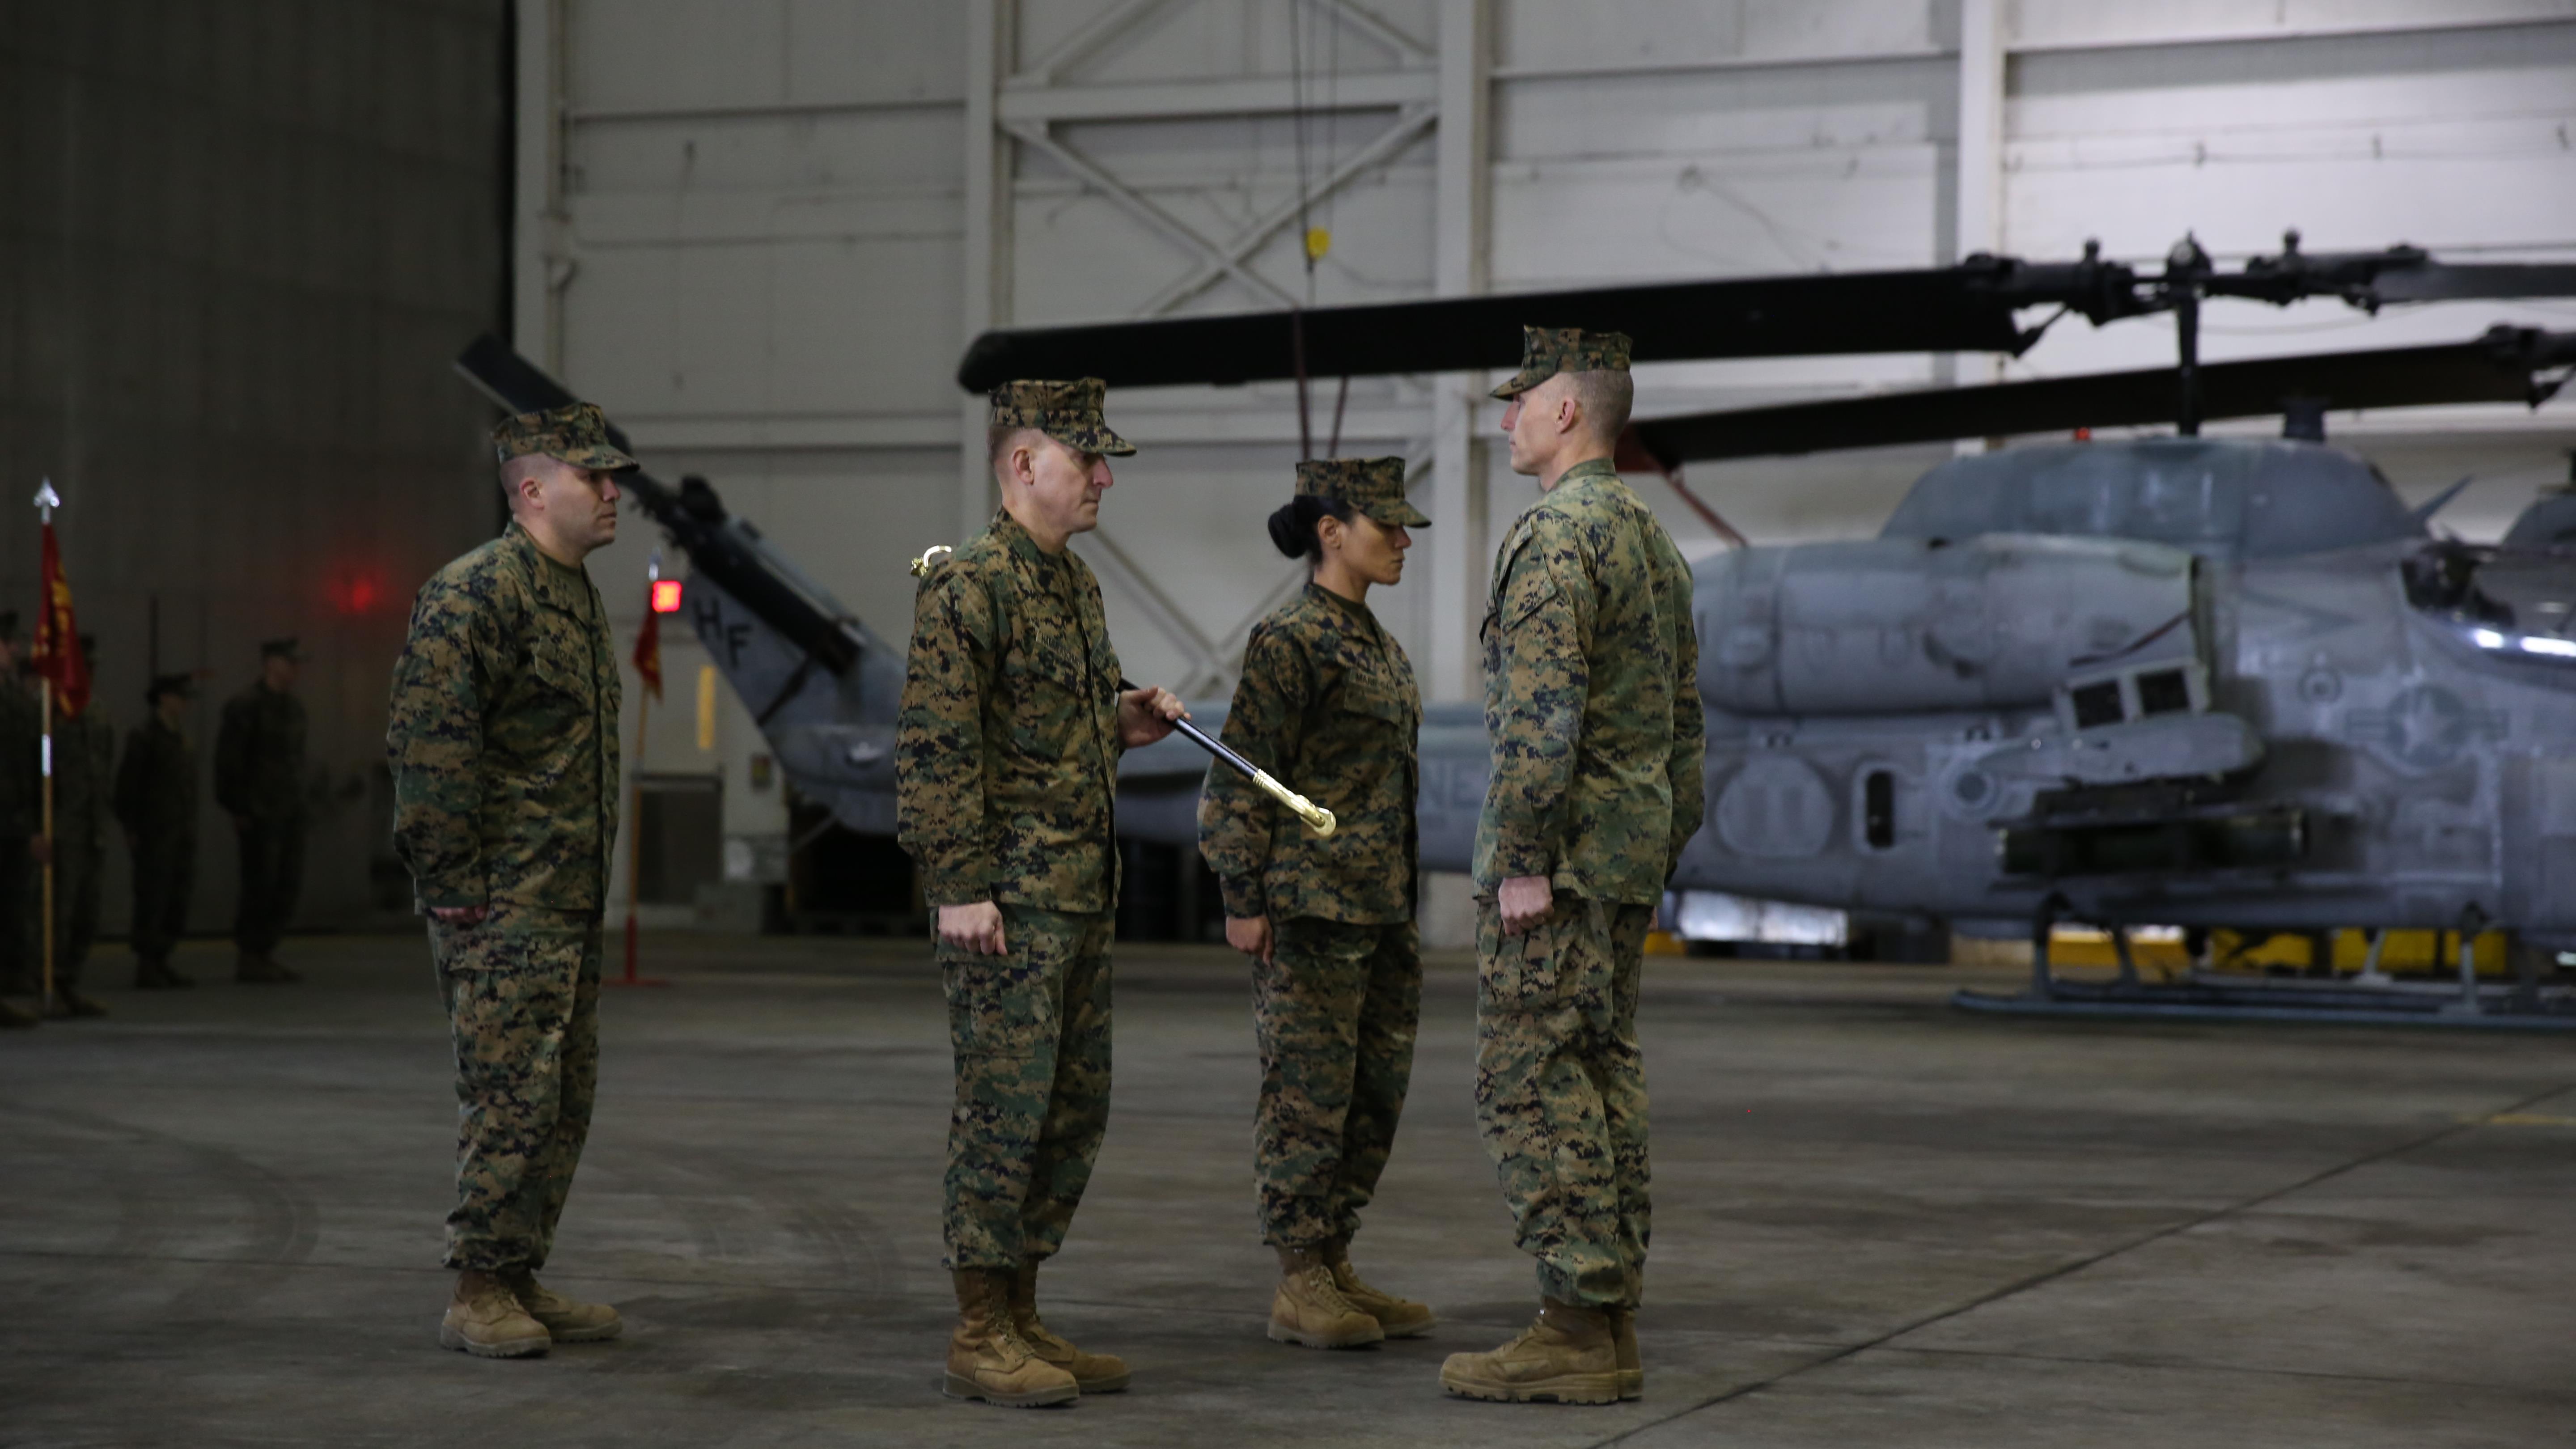 Hmla 269 Bids One Sergeant Major Goodbye Welcomes New Marine Corps Air Station New River